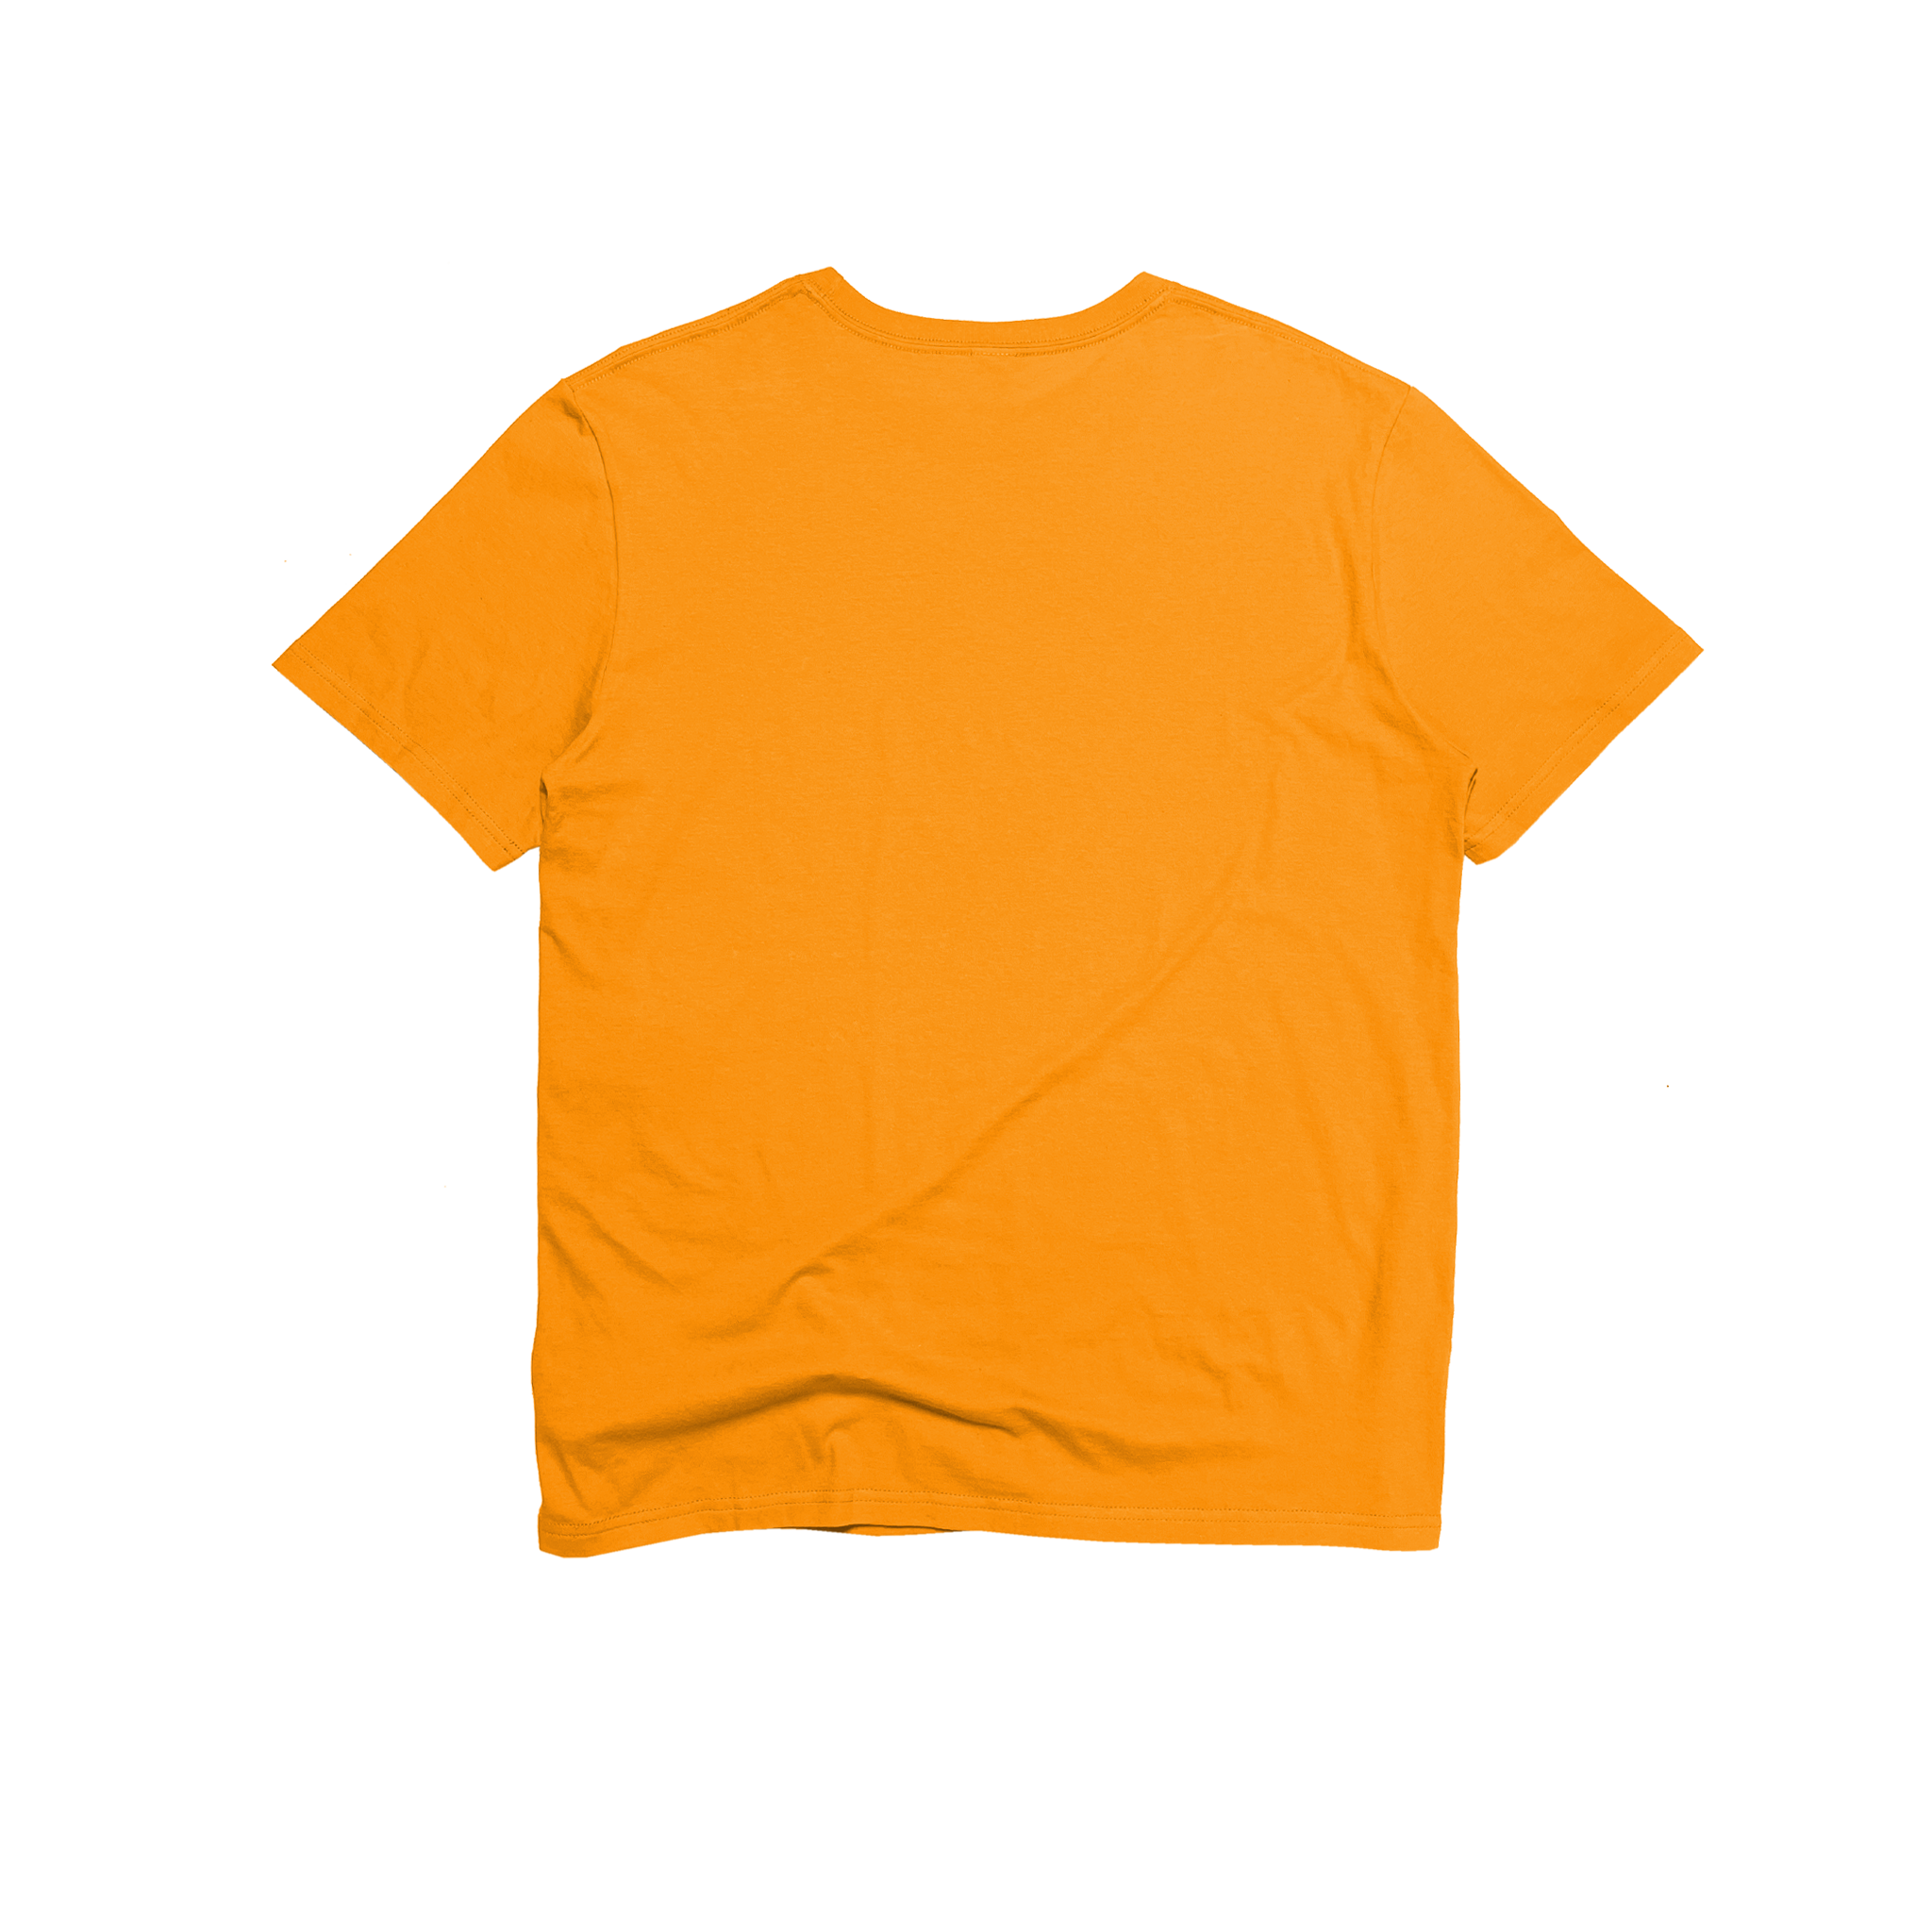 Back Flat Lay of GOEX Unisex and Men's Cotton Tee in Marigold